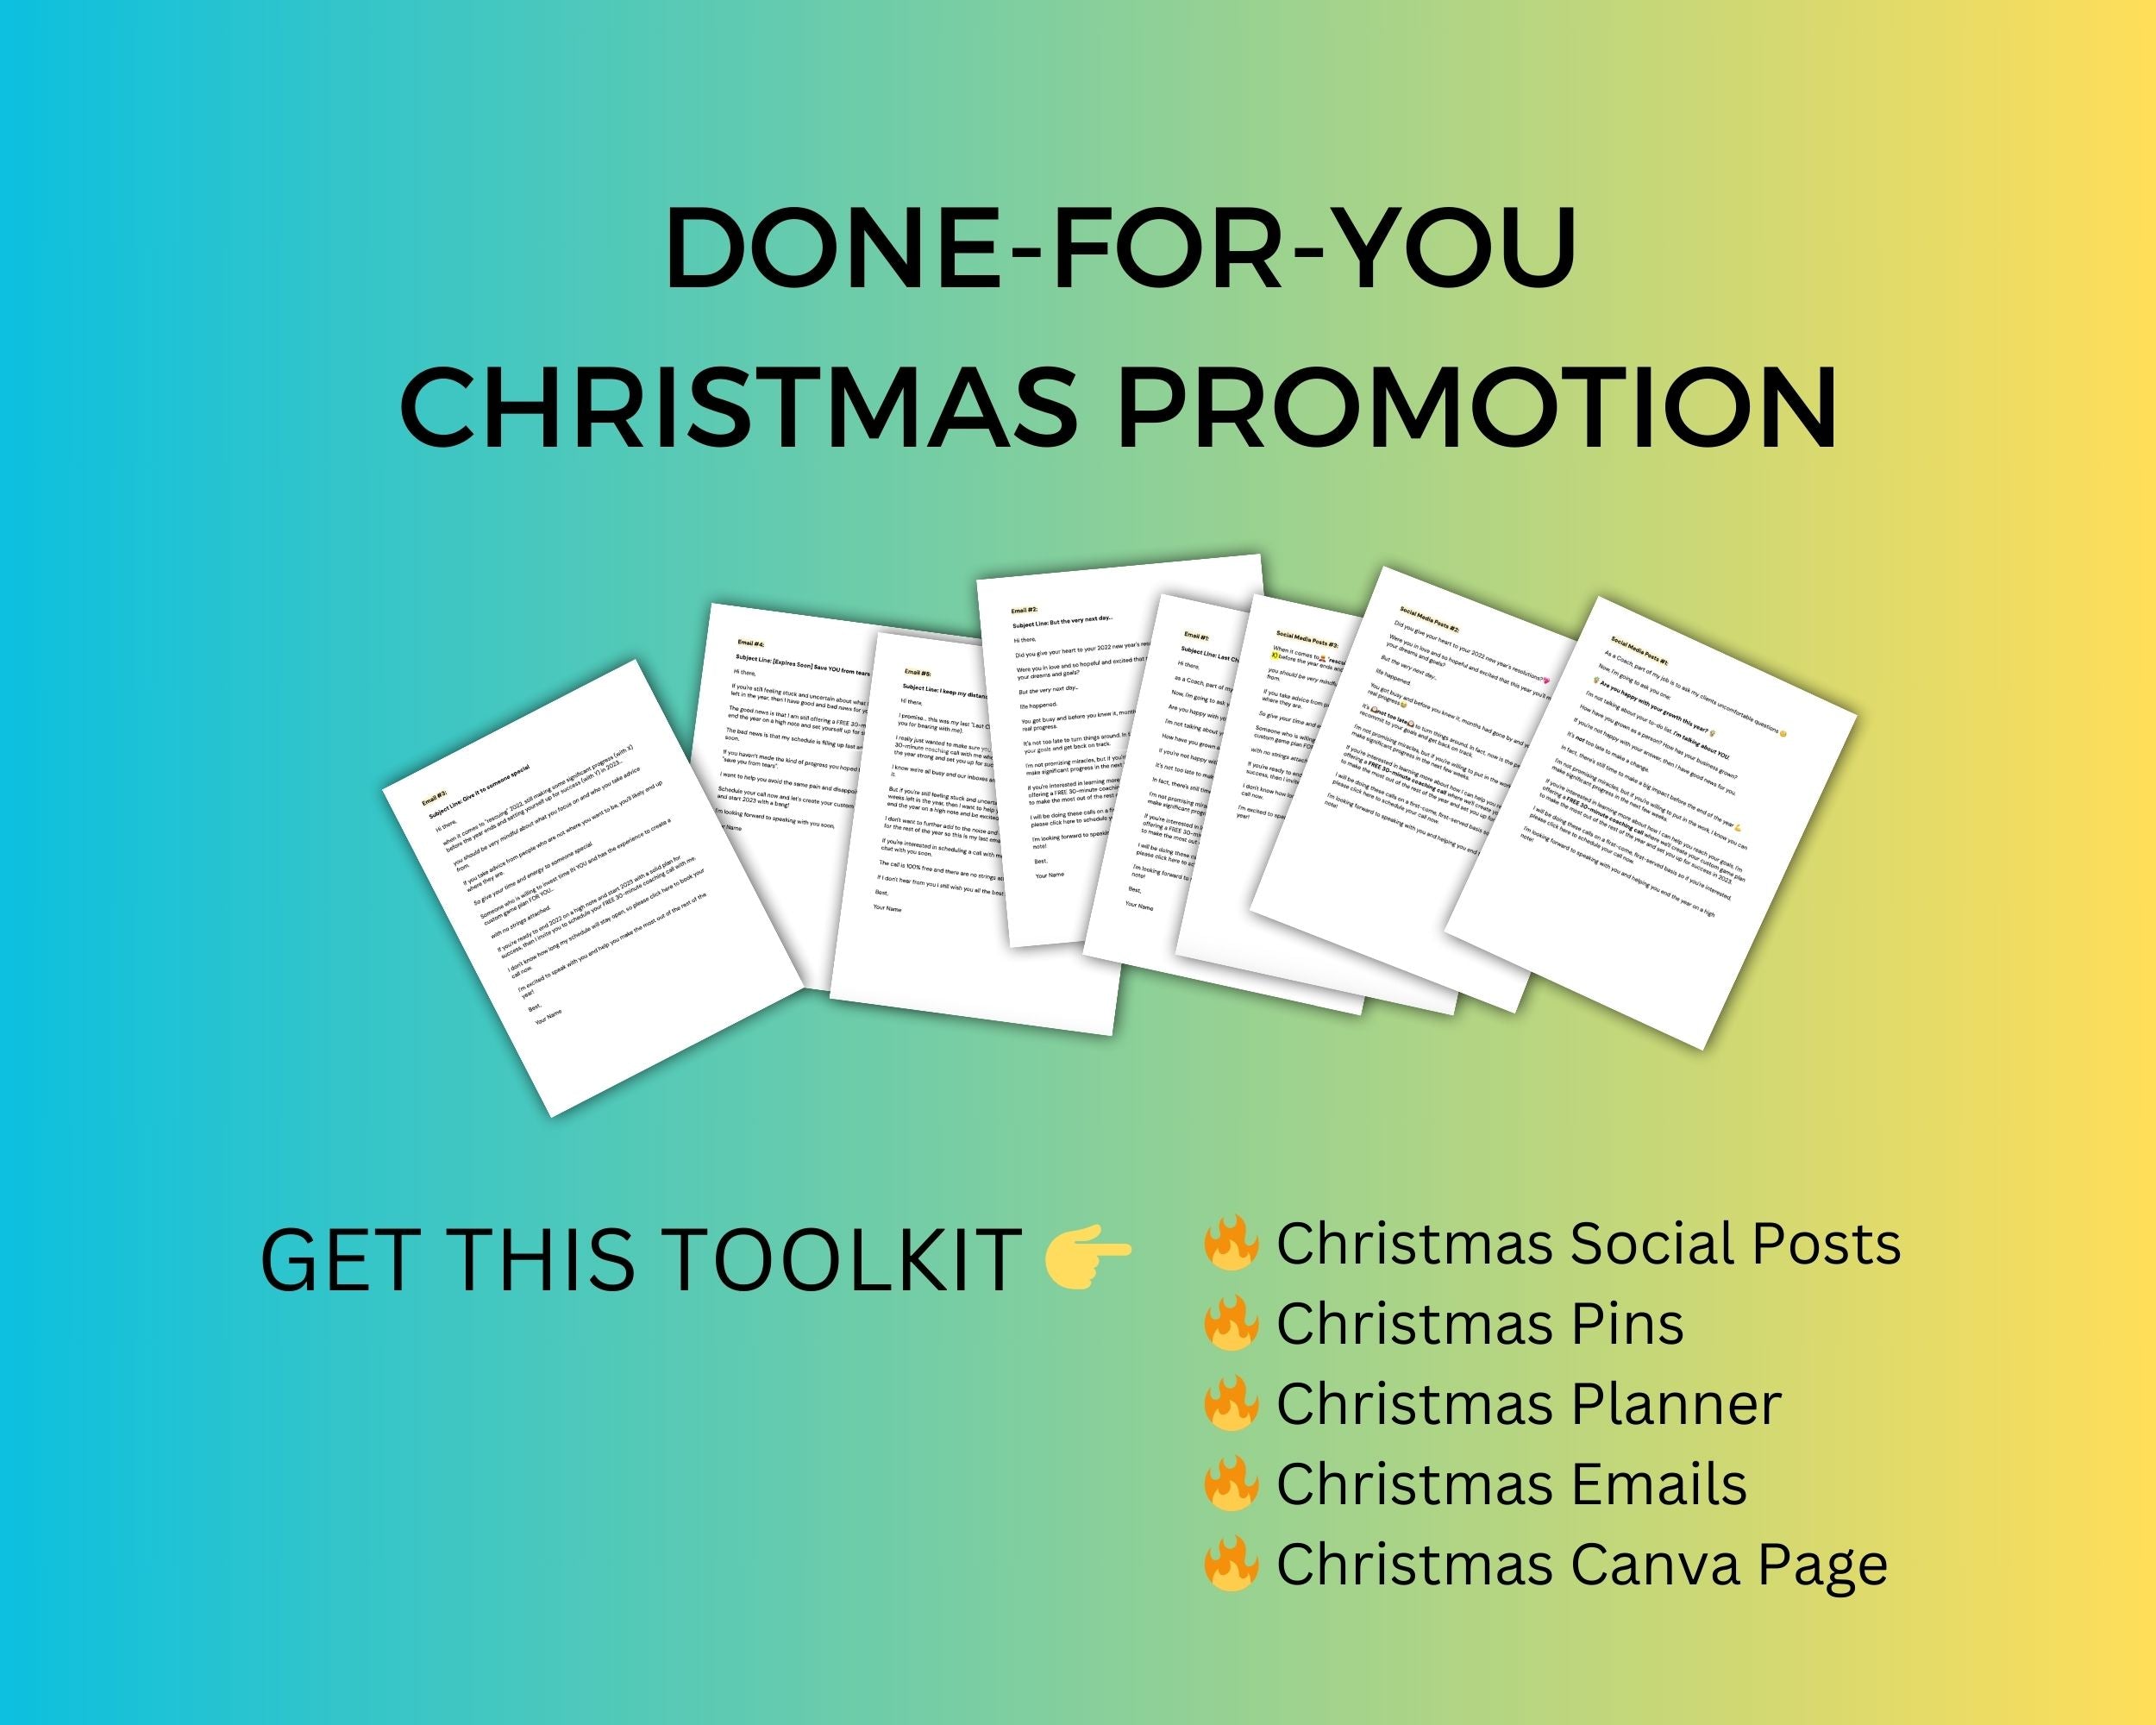 Christmas Magic Toolkit  Done For You Christmas Promotion  Course Creator Tools